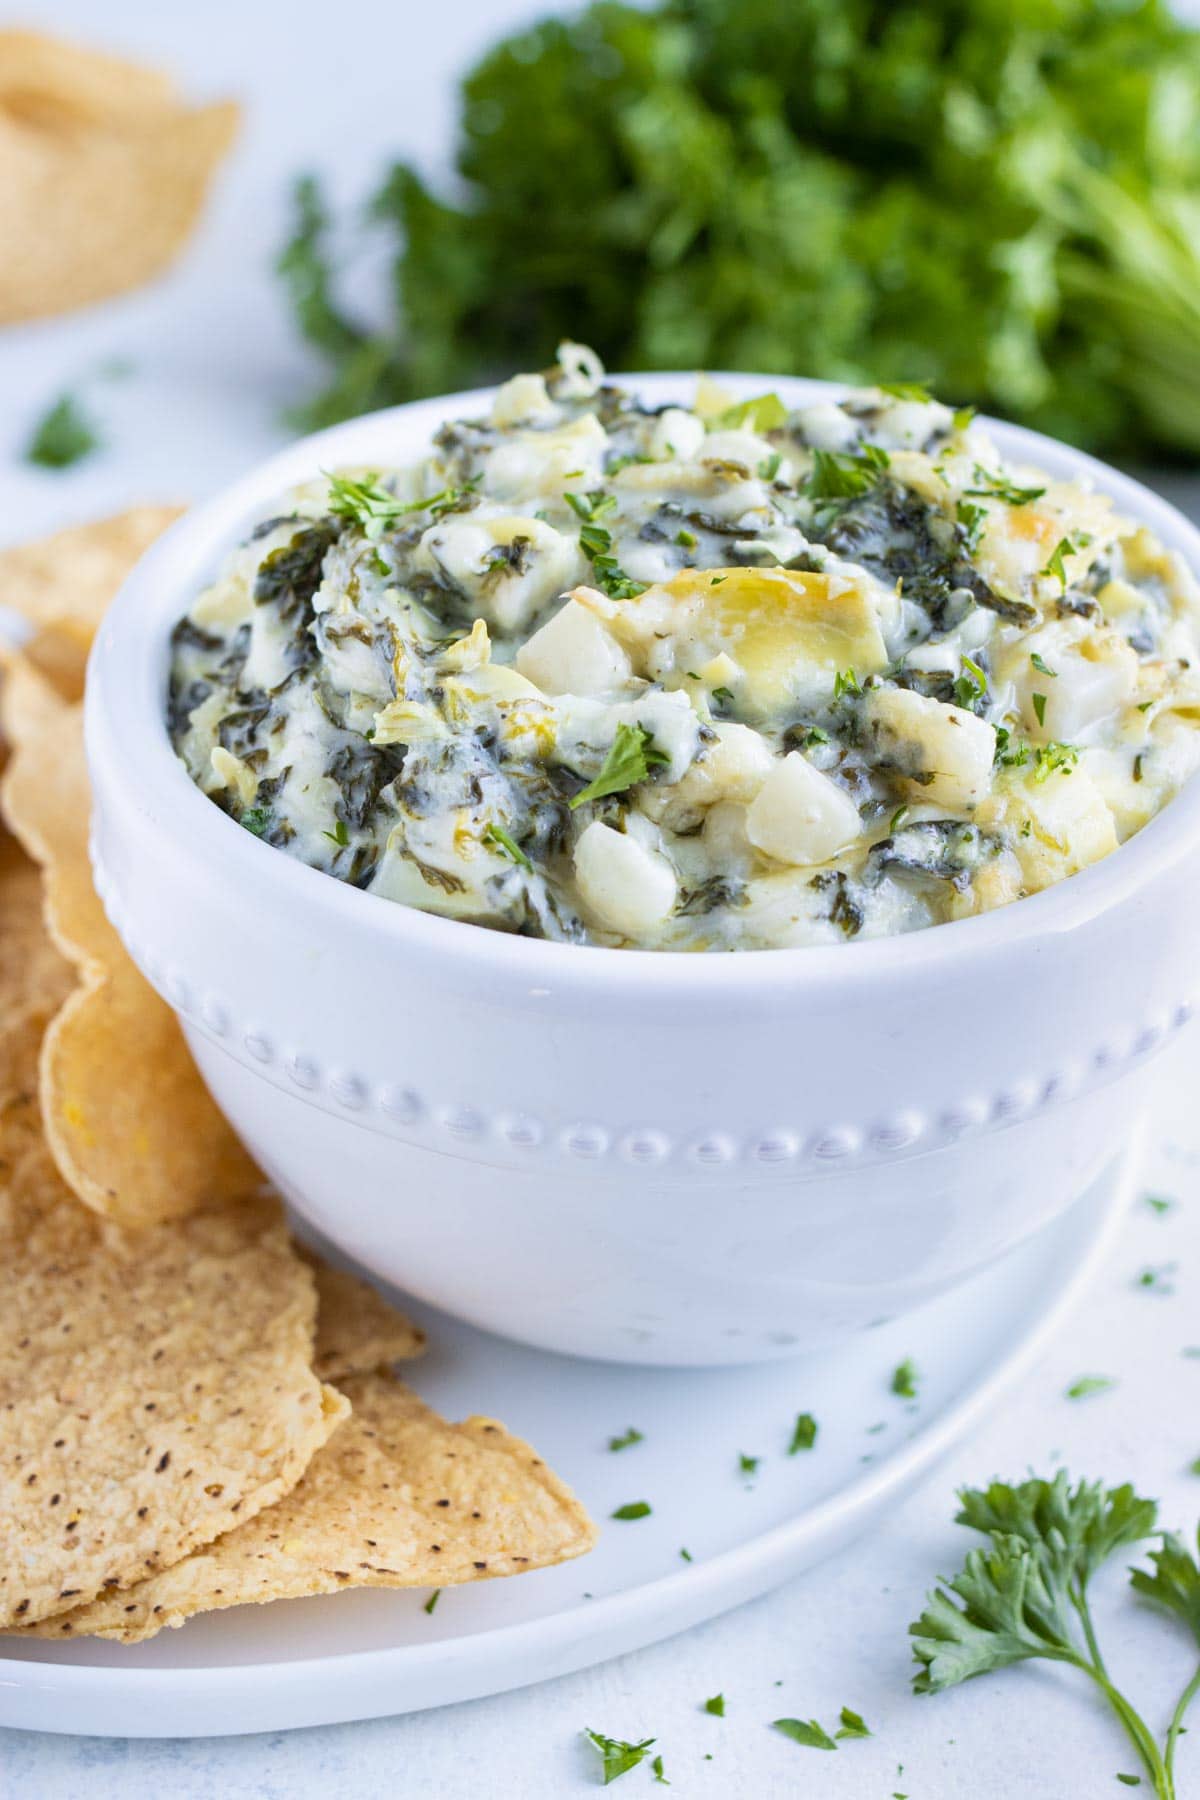 Creamy spinach artichoke dip is served with tortilla chips from a bowl.